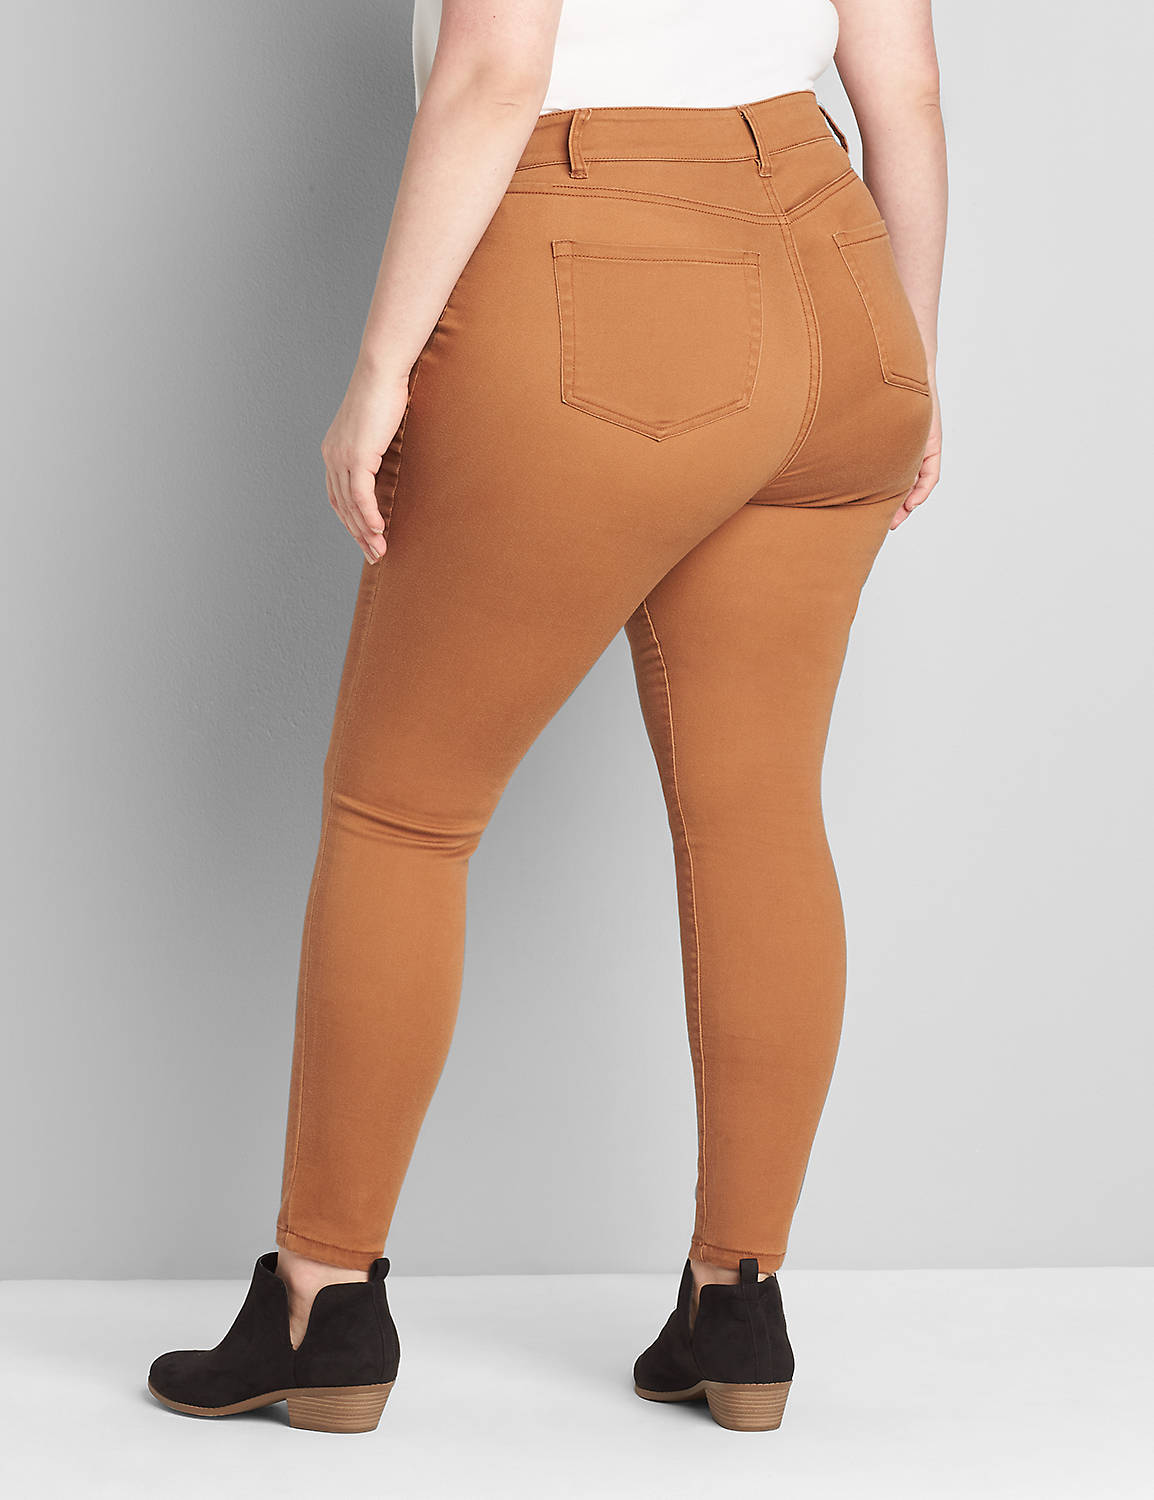 Curvy Fit High Rise 5 Pocket Sateen Product Image 2